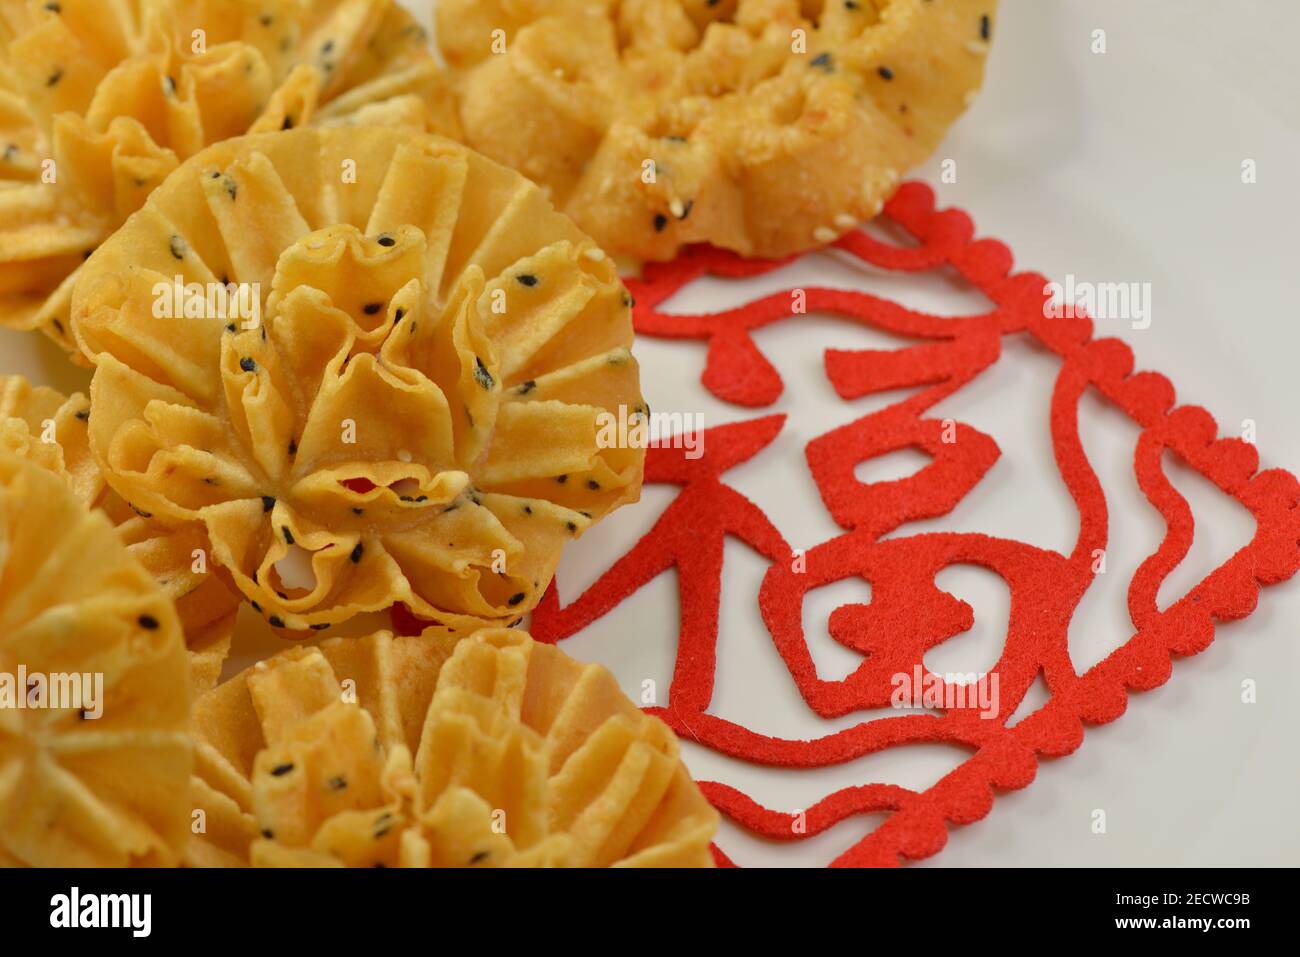 Kuih Rose are popular festive treats to celebrate Chinese New Year in Singapore & Malaysia, seen here with a red "Fu" or "Fortune" decoration Stock Photo